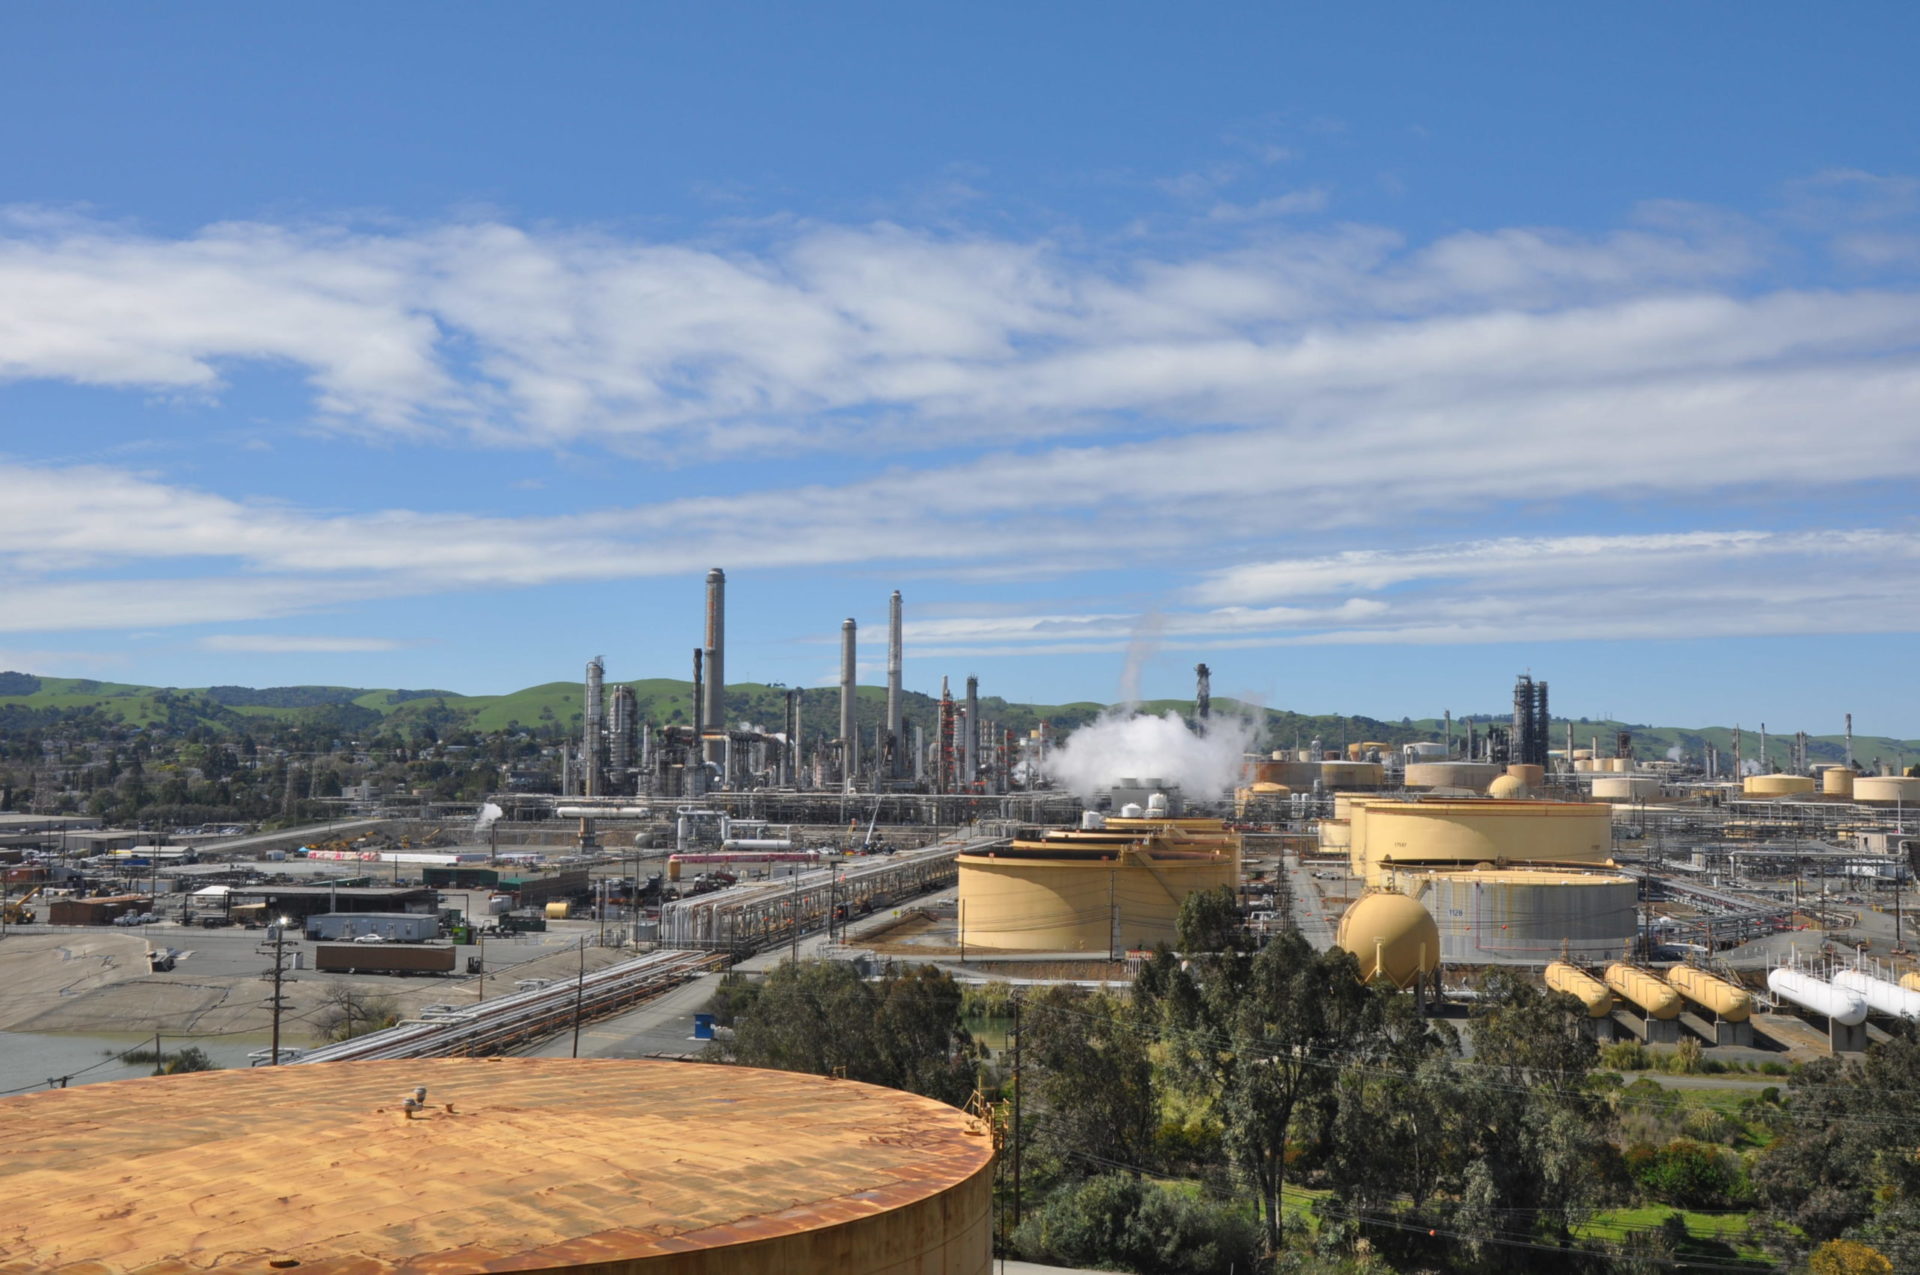 Image from the Gallery: Shell Refinery – Martinez, CA